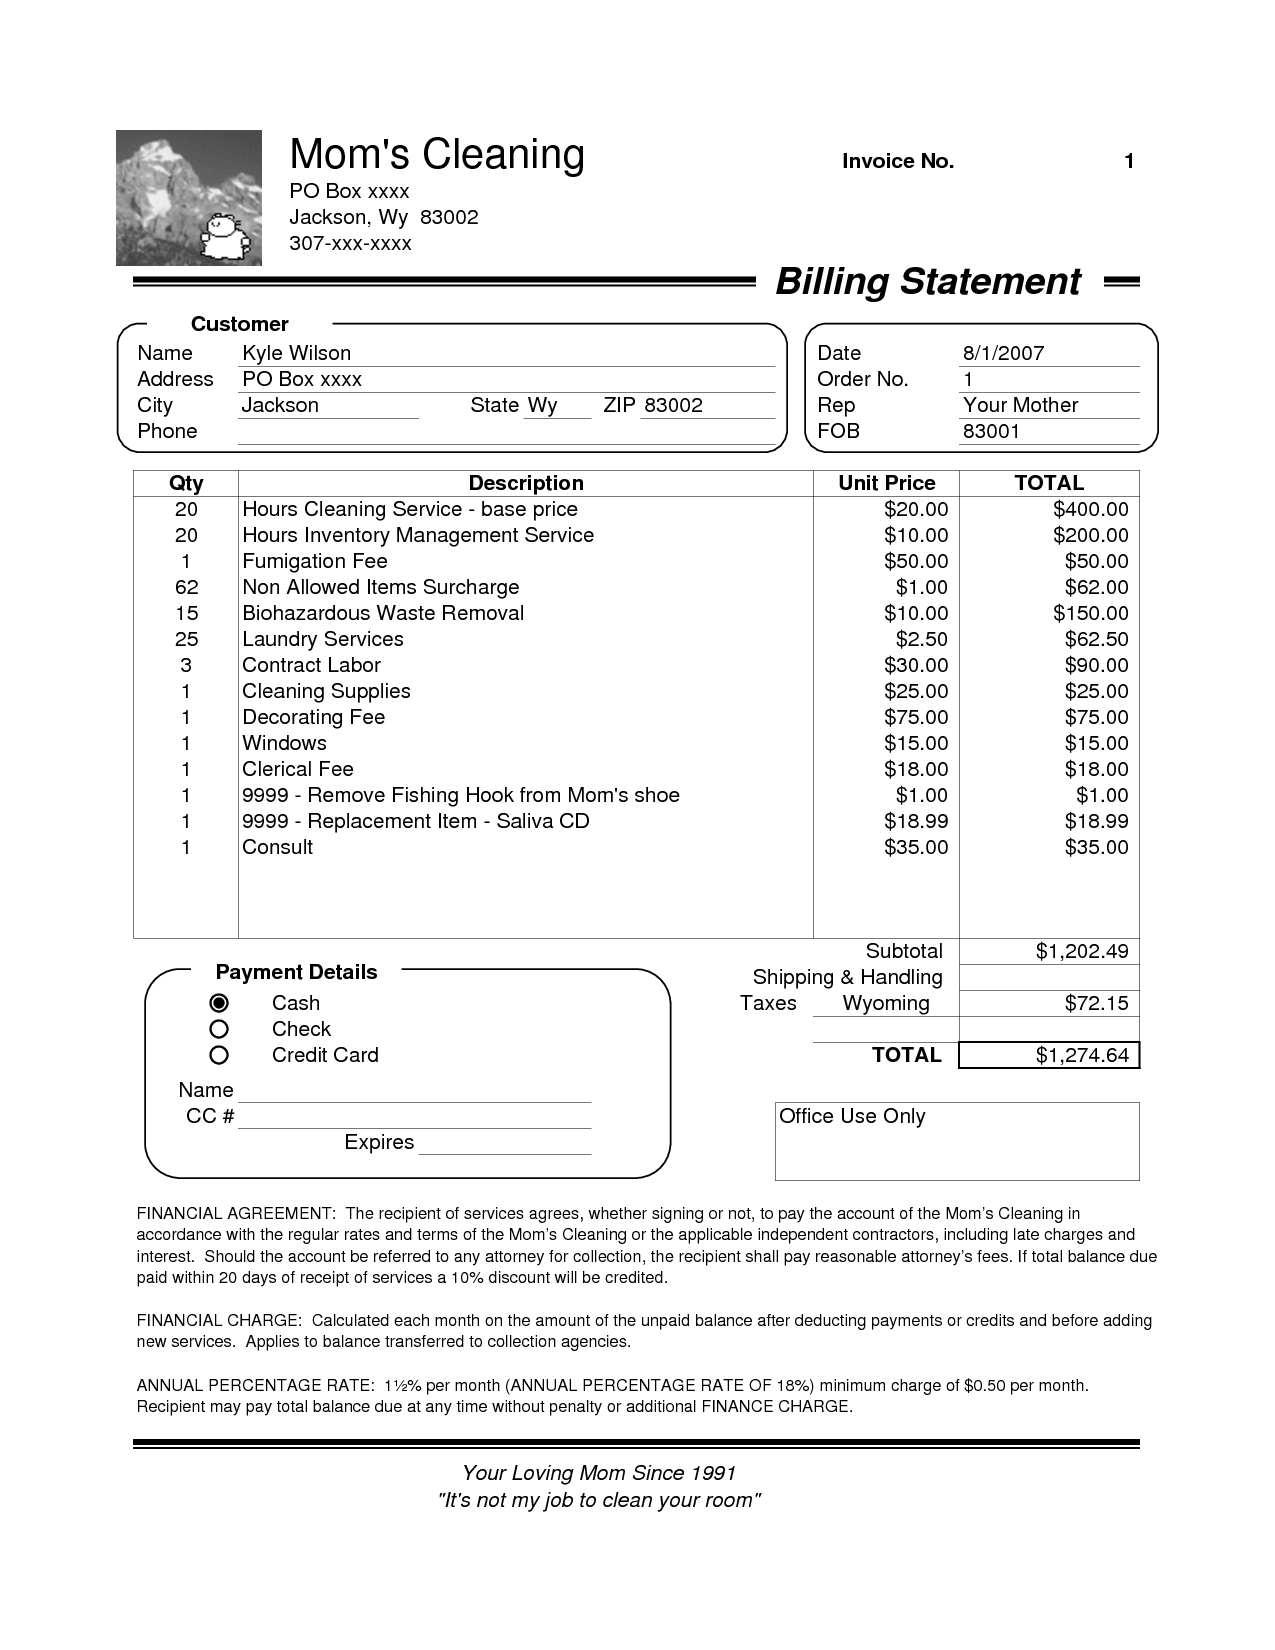 window-cleaning-invoice-invoice-template-ideas